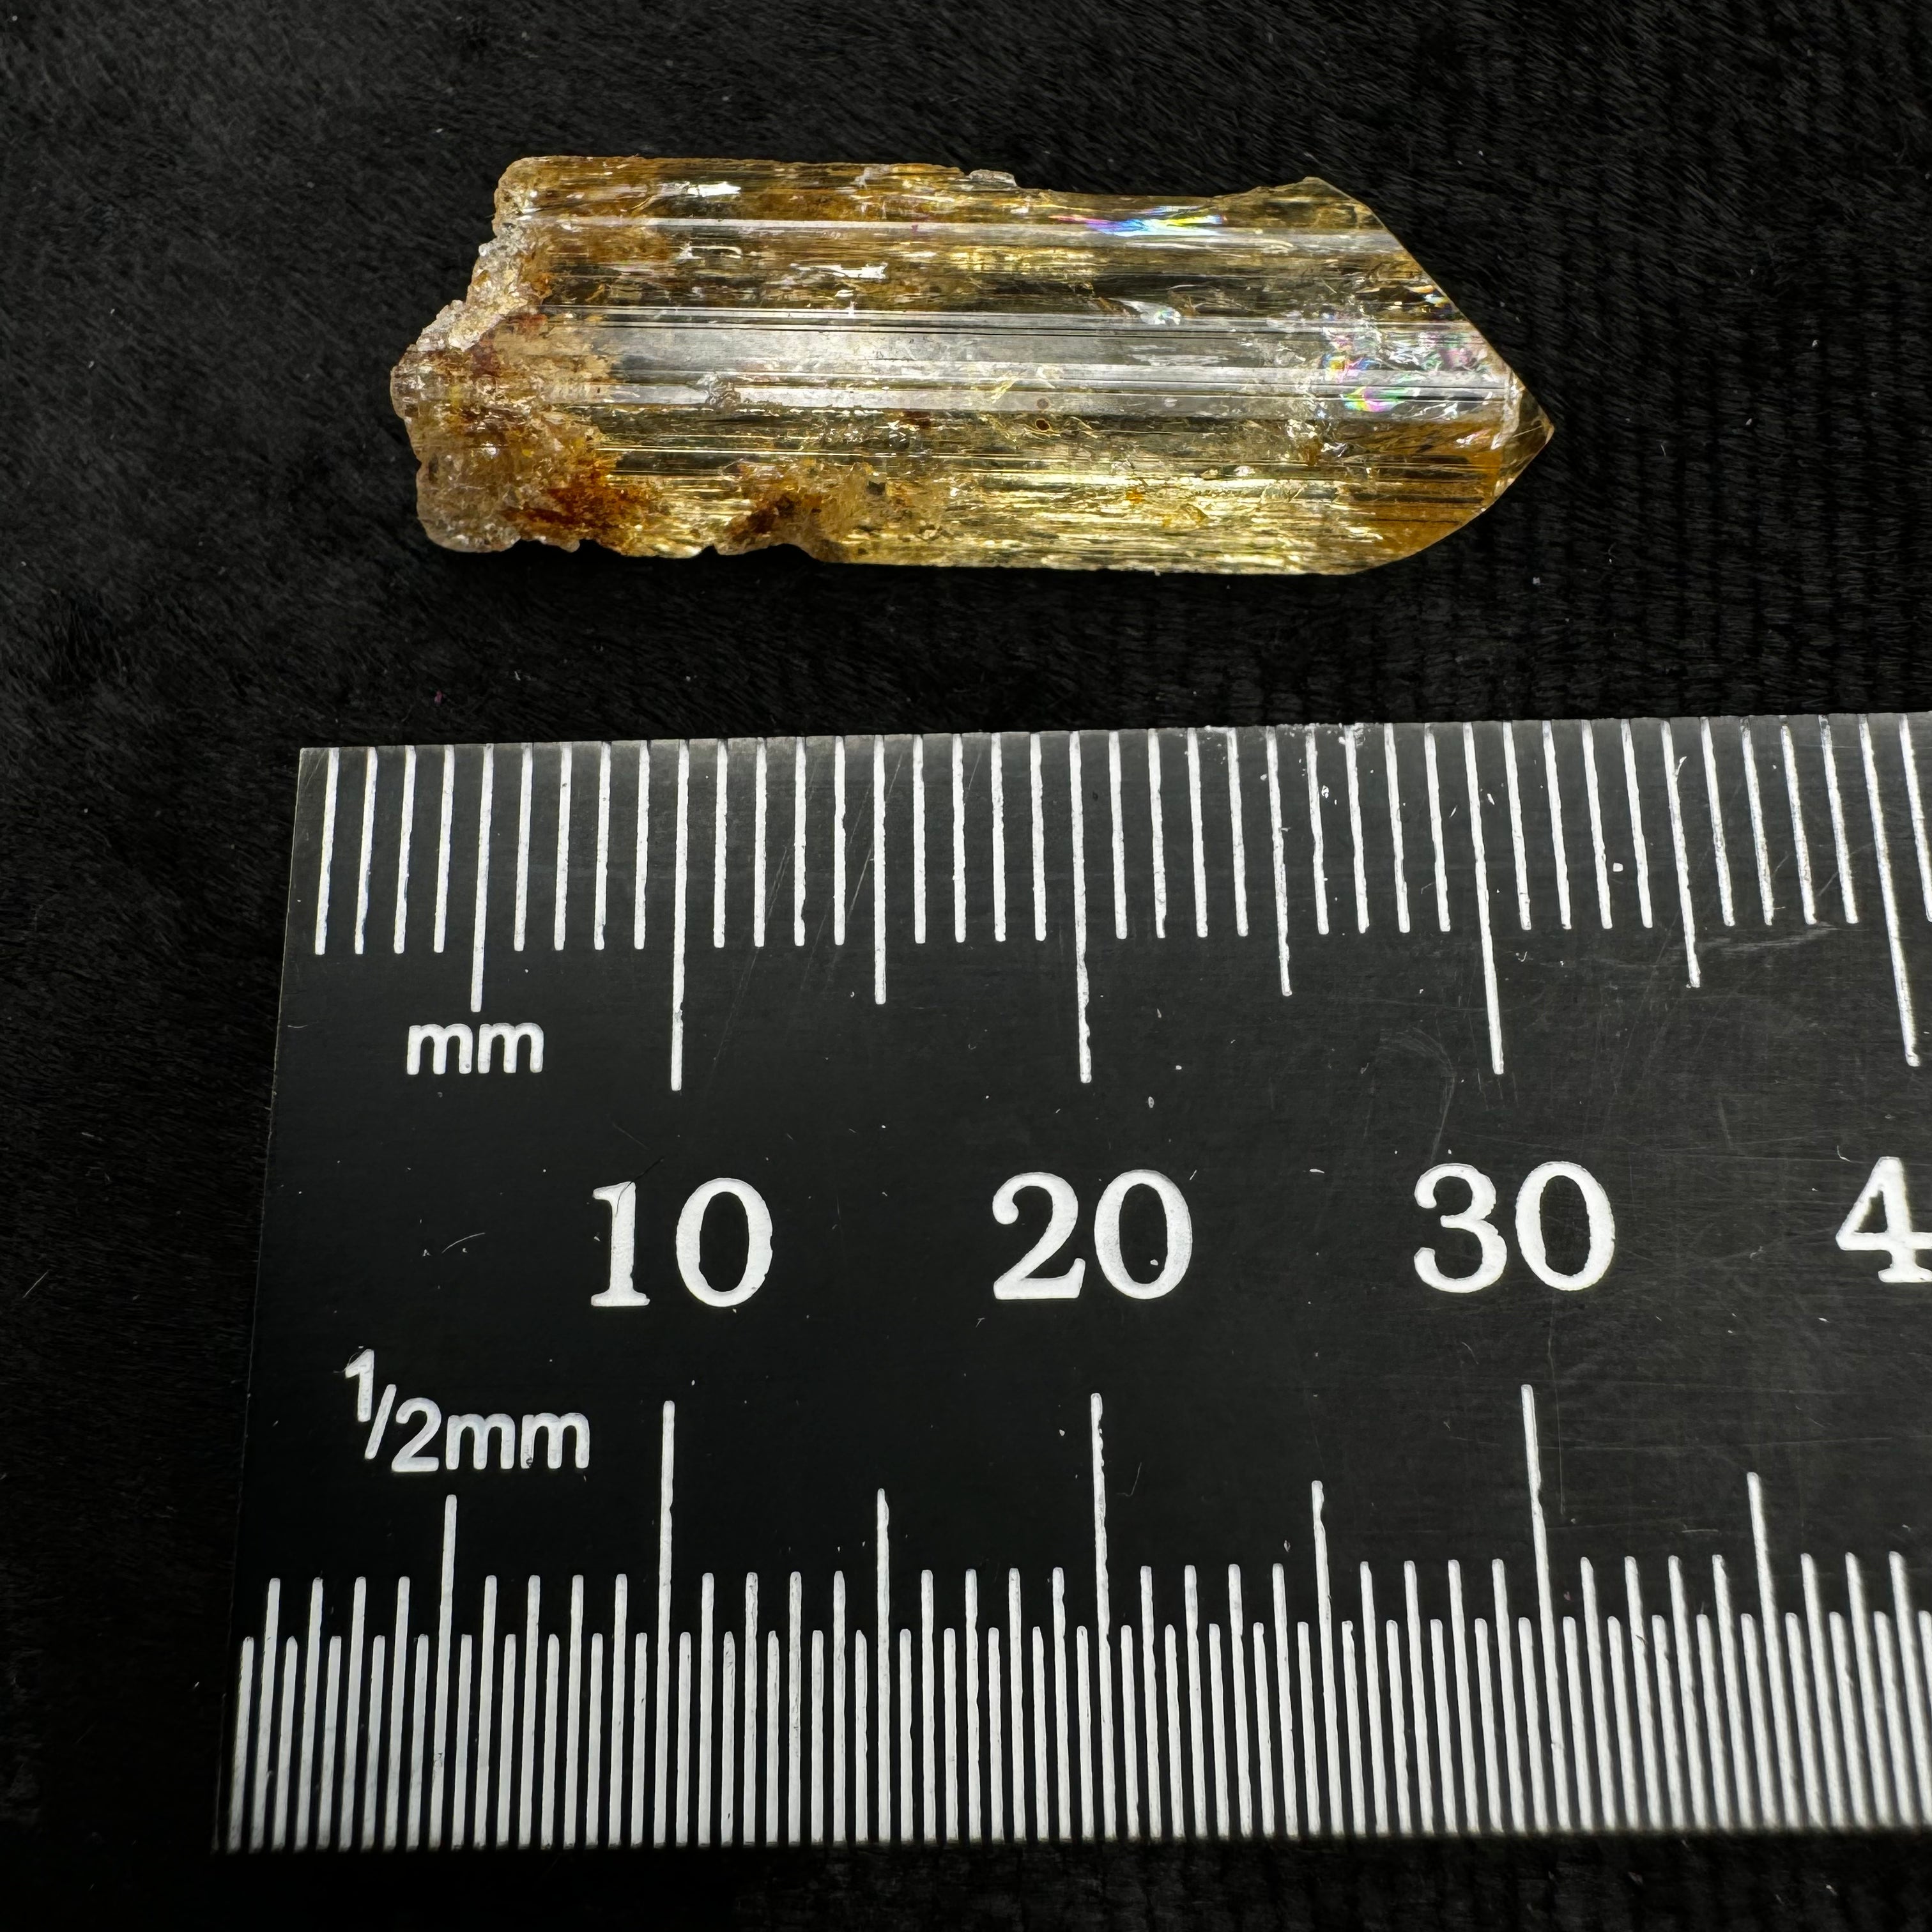 Imperial Topaz Natural Full Terminated Crystal - 195